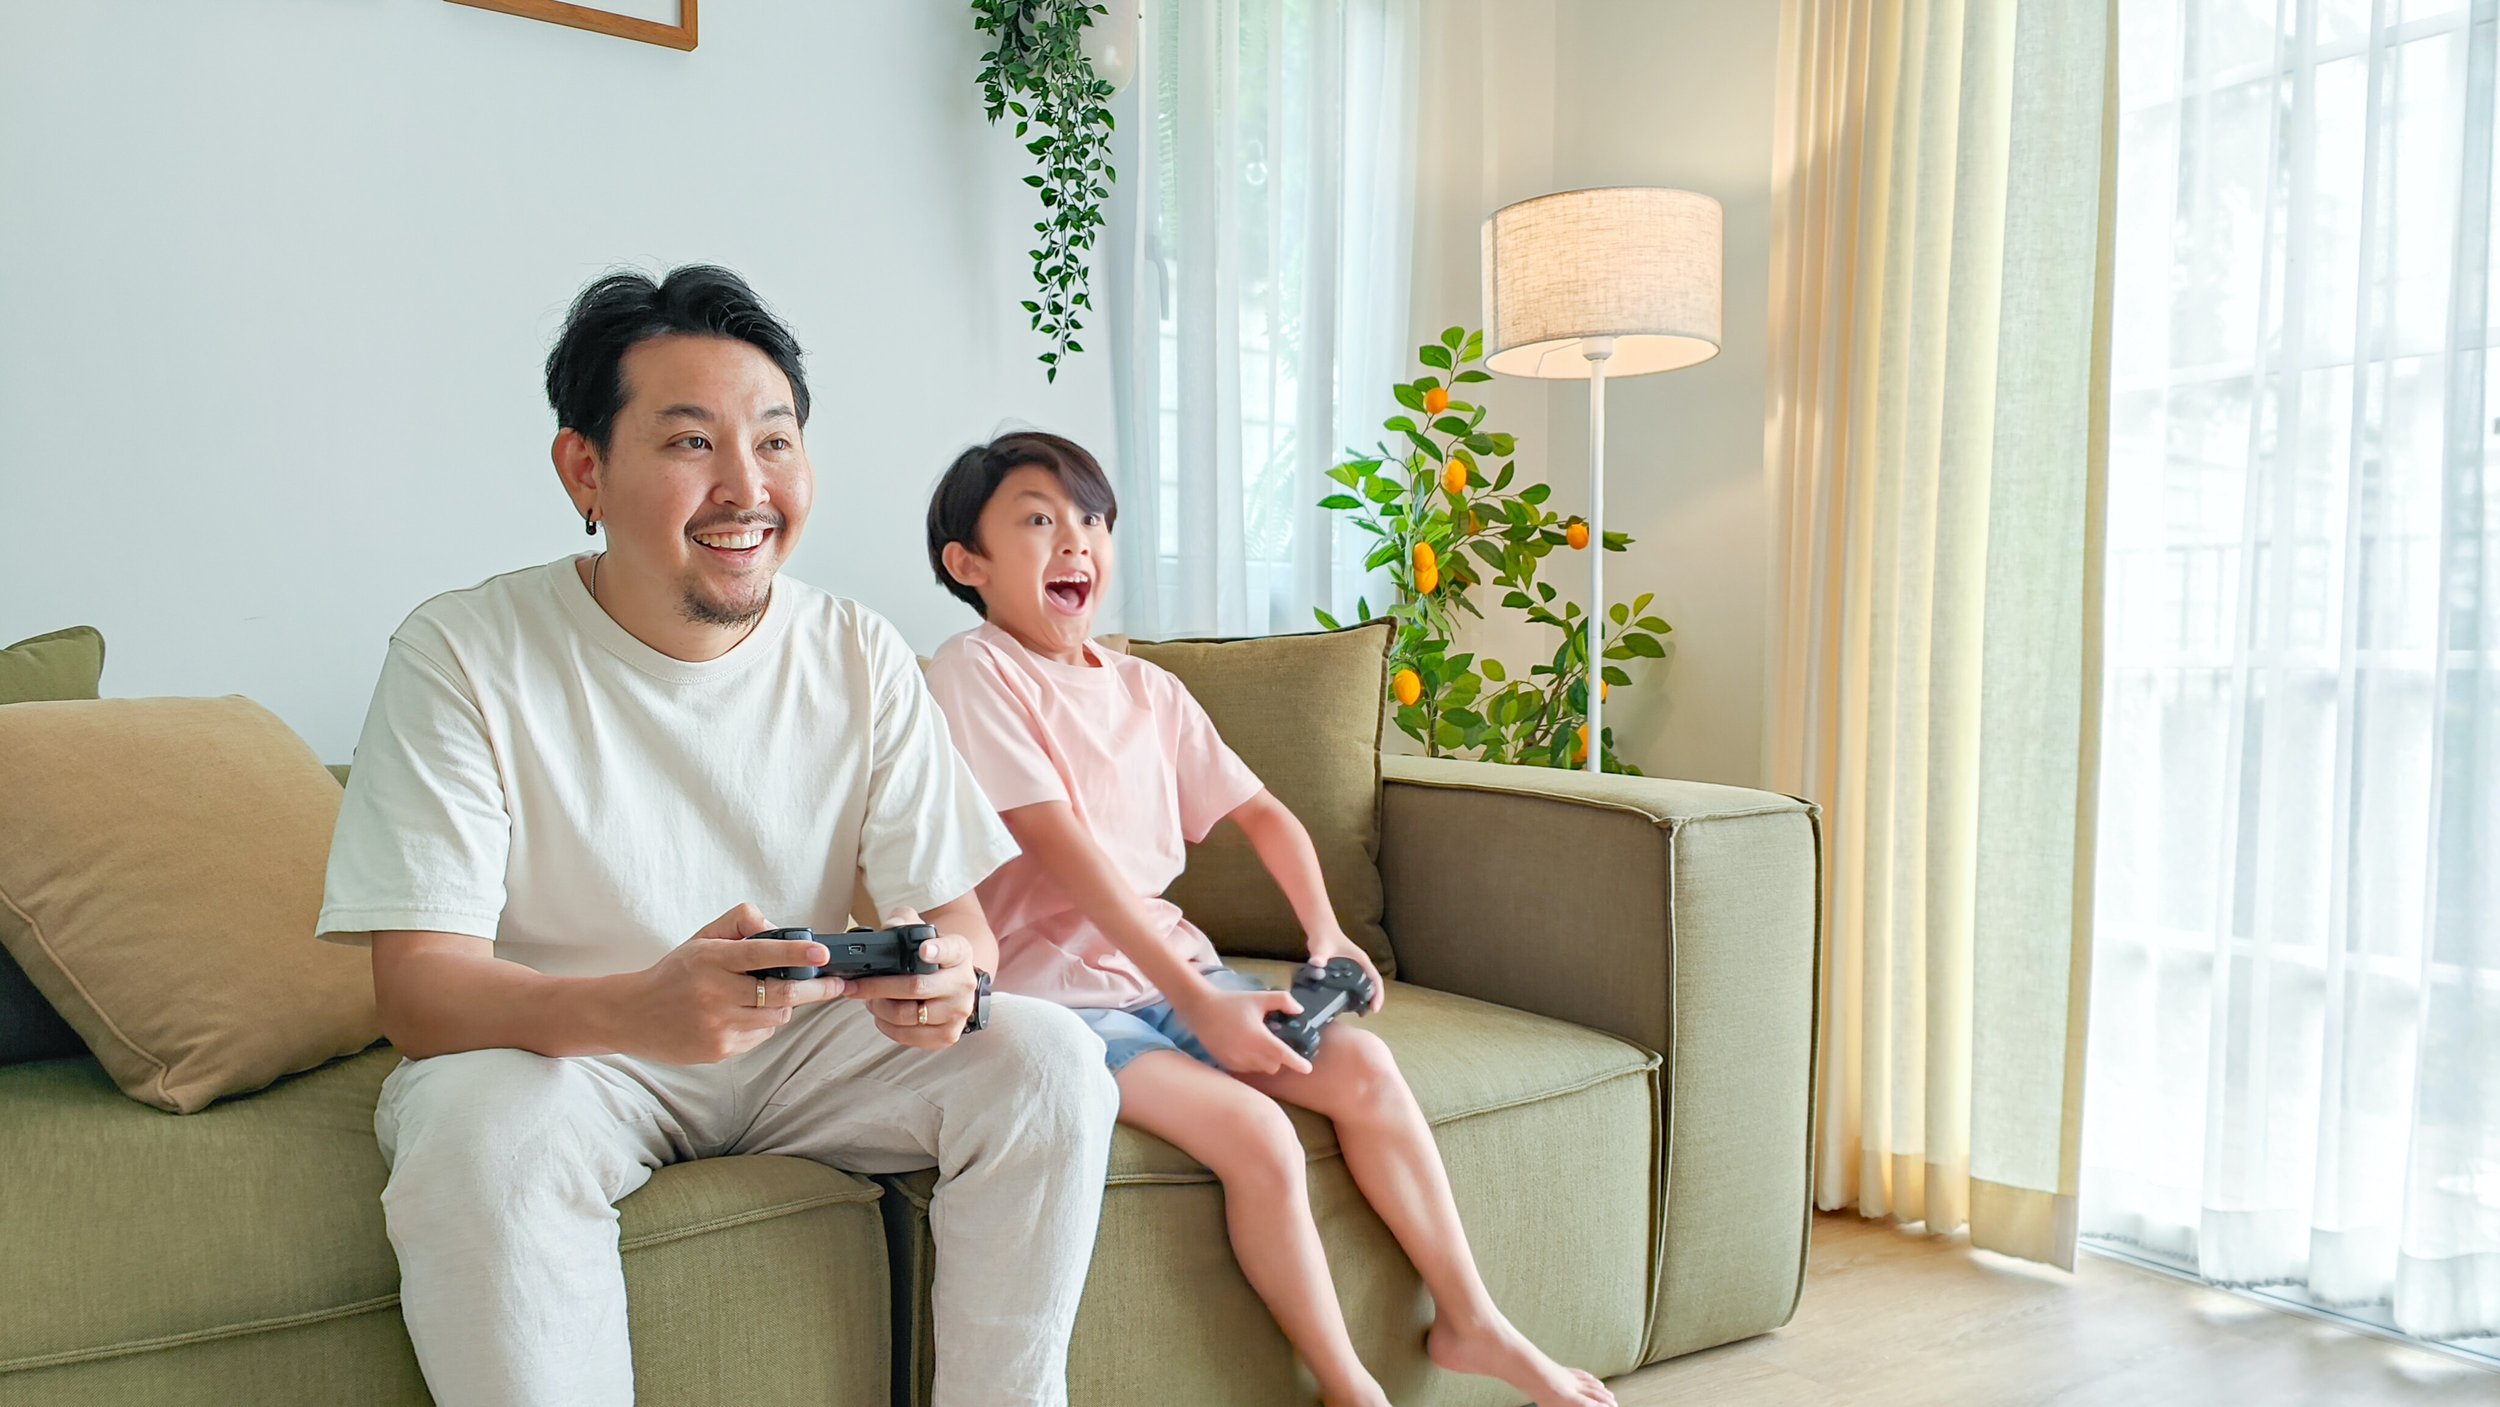  An Asian father and son presenting pair of people. They are both sitting on a green couch indoors, playing a video game with big smiles on their faces.  